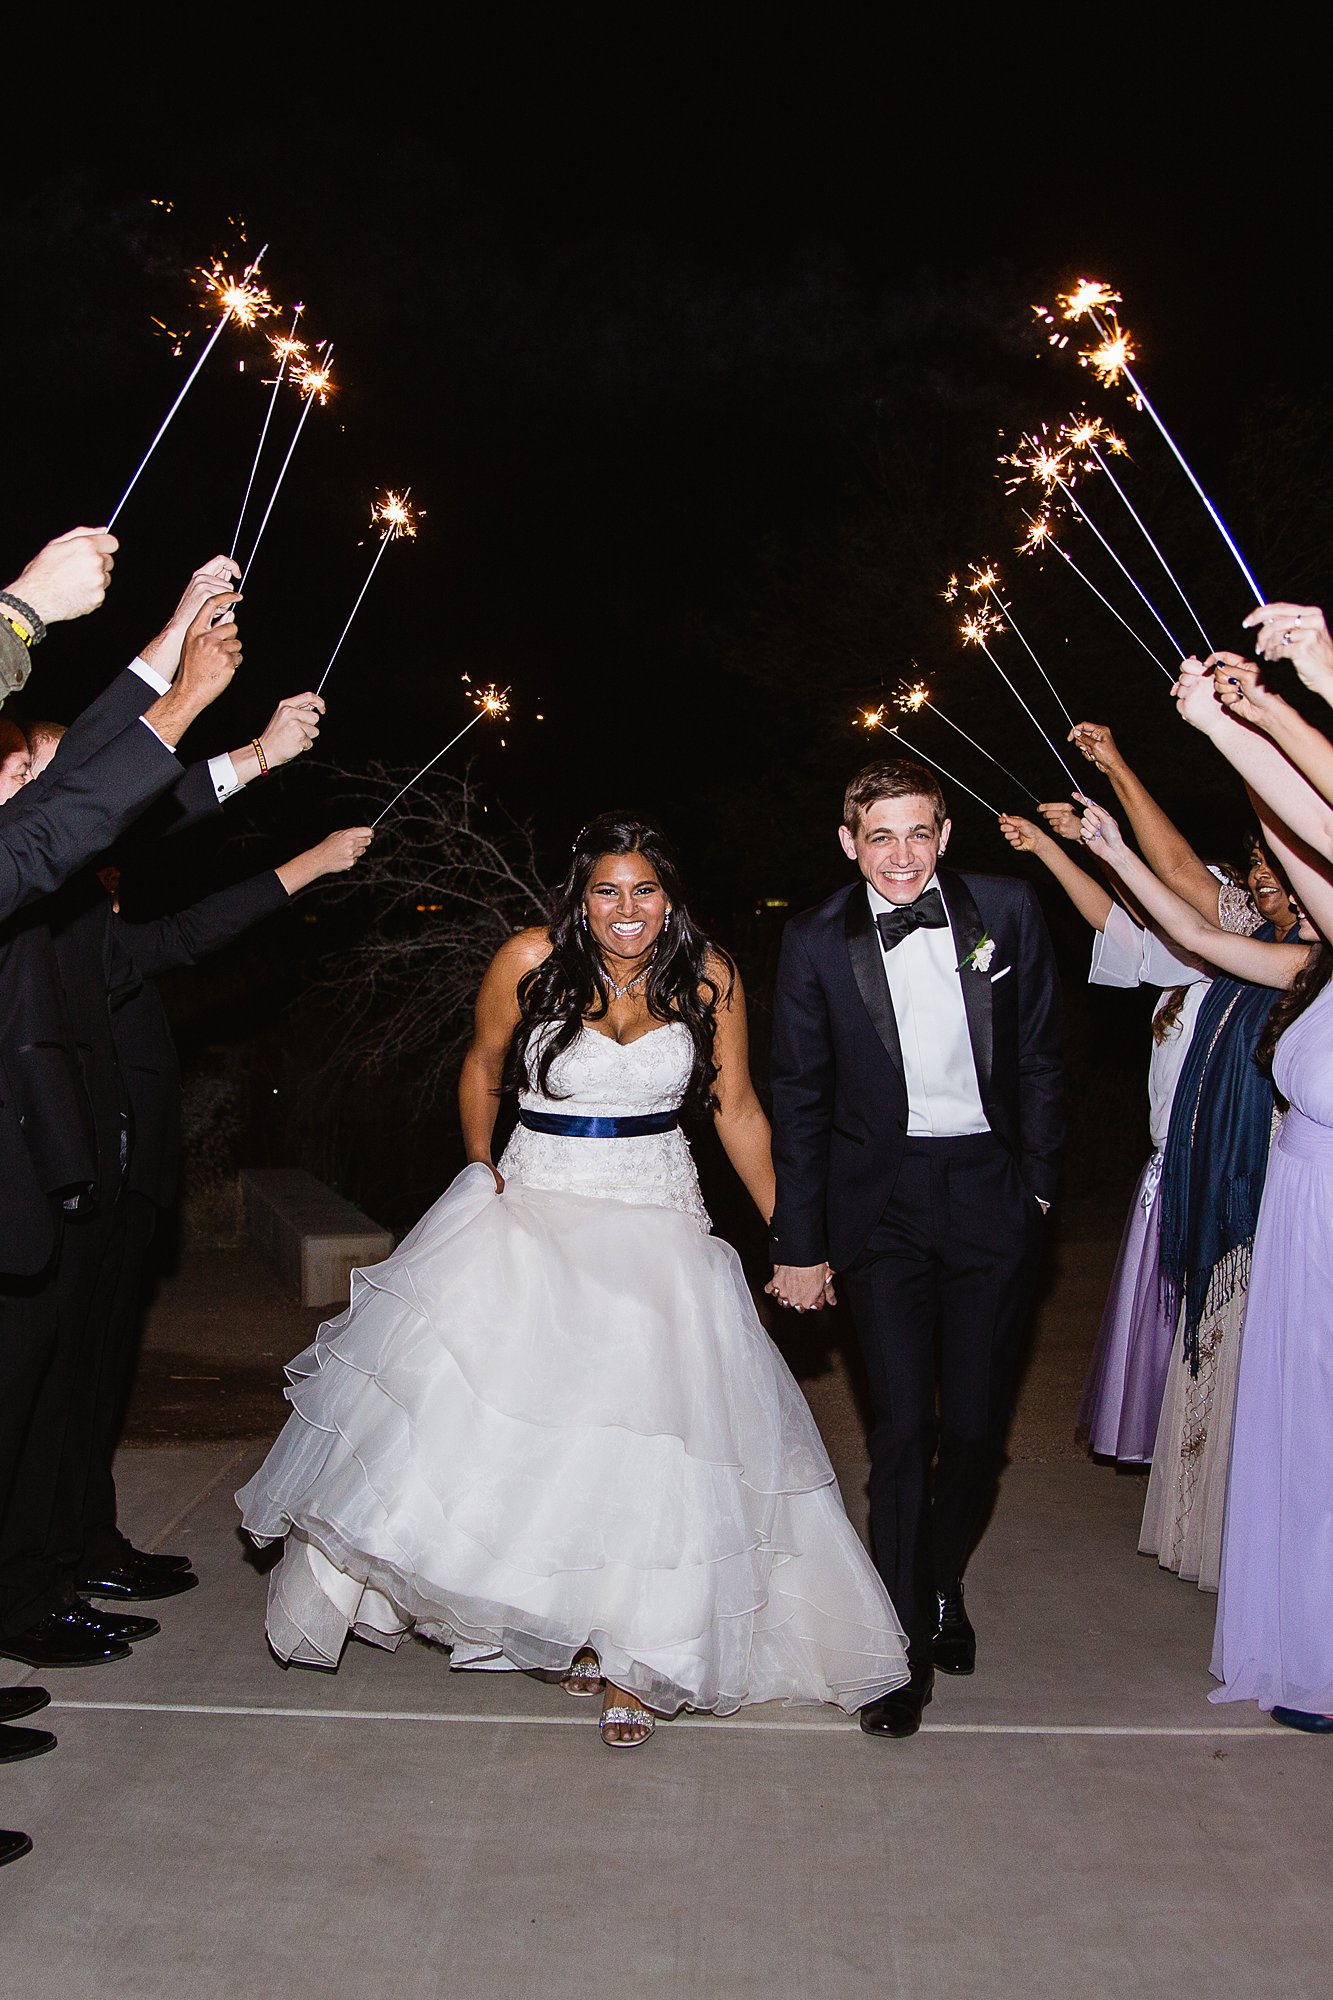 Bride and groom running through their sparkler exit by wedding photographer PMA Photography.